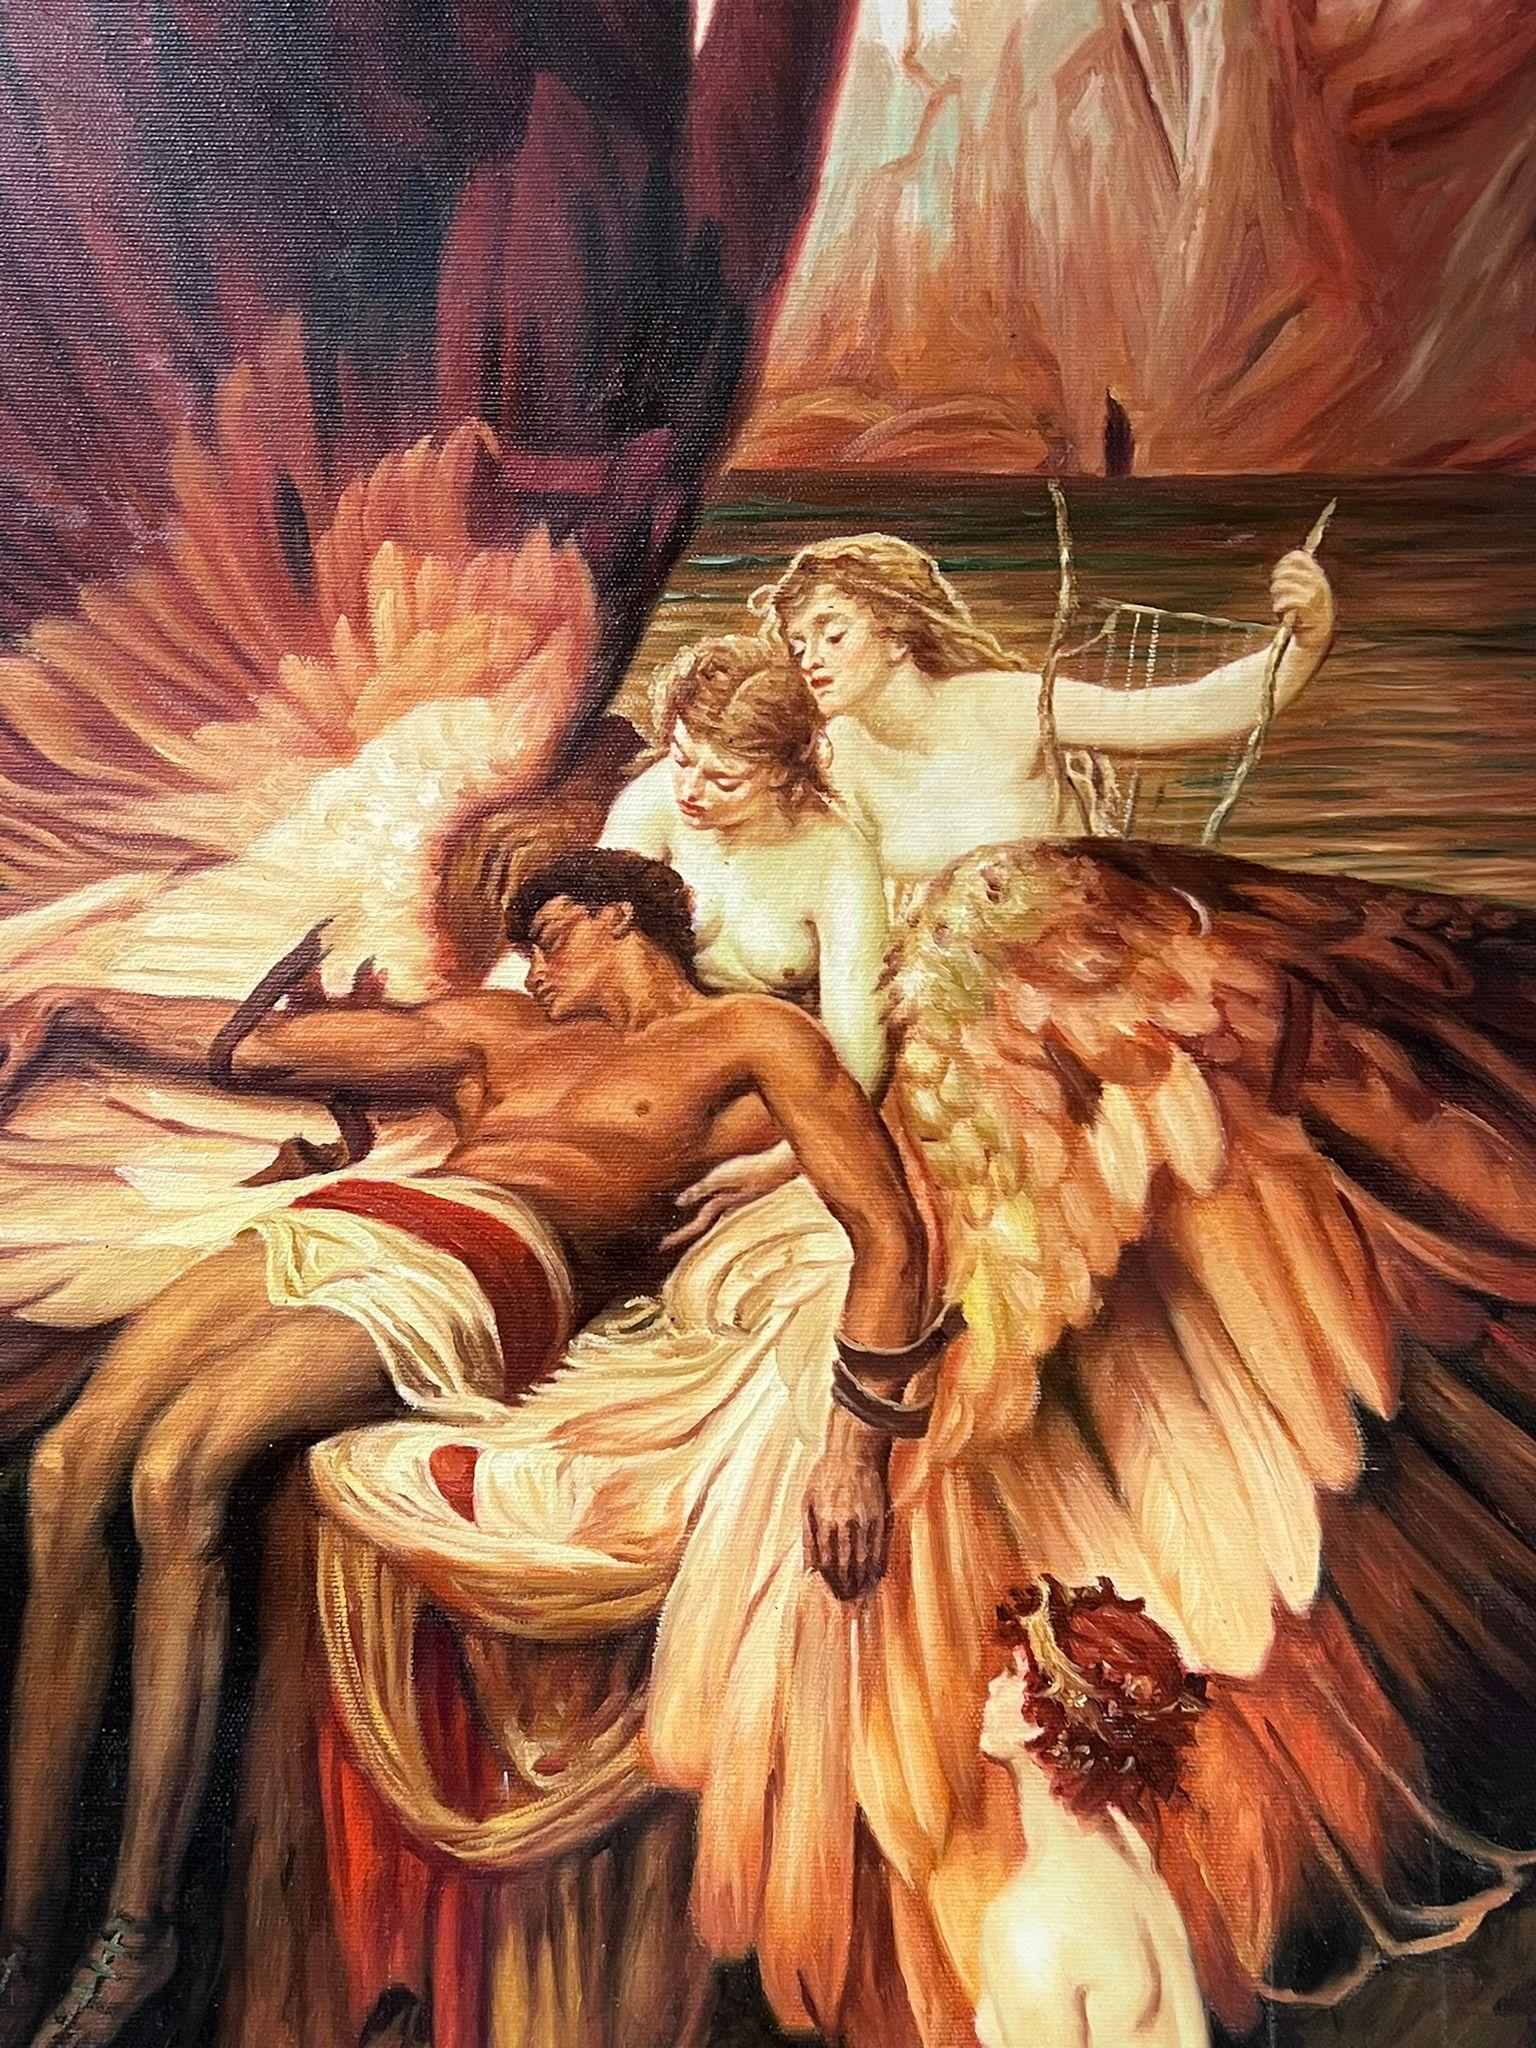 'The Lament of Icarus'
Continental School, late 20th century, signed
after the original painting by Herbert James Draper 
oil on canvas, unframed
canvas : 36 x 24 inches
provenance: private collection, UK
condition: very good and sound condition